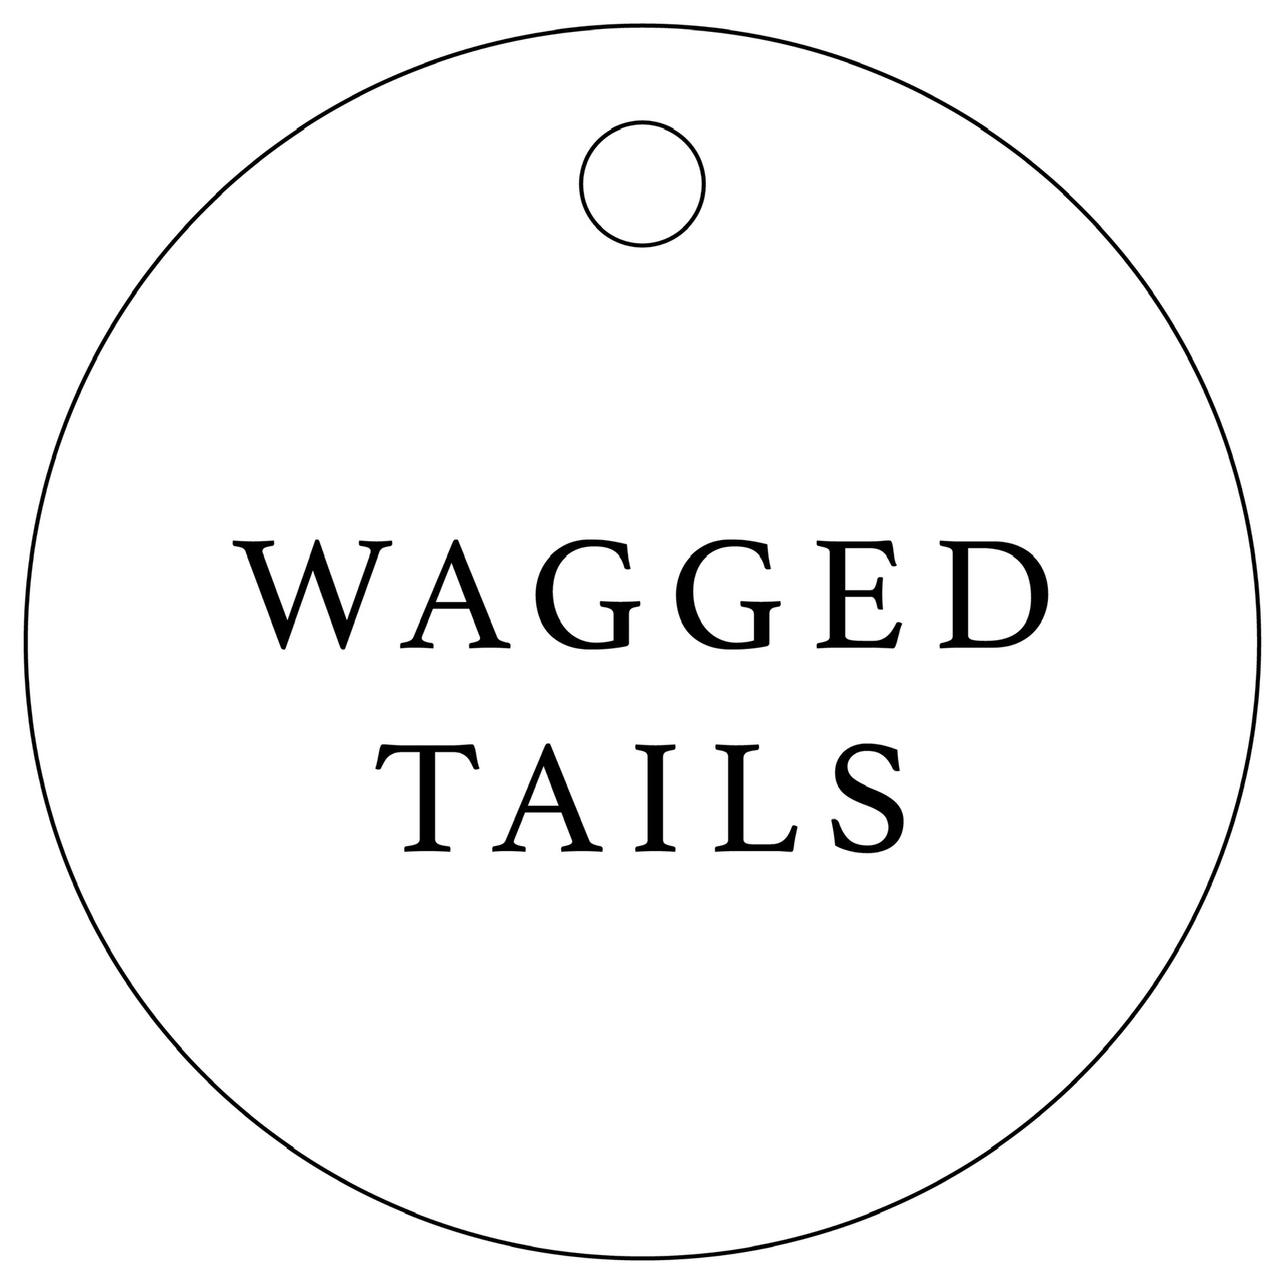 Wagged Tails's images